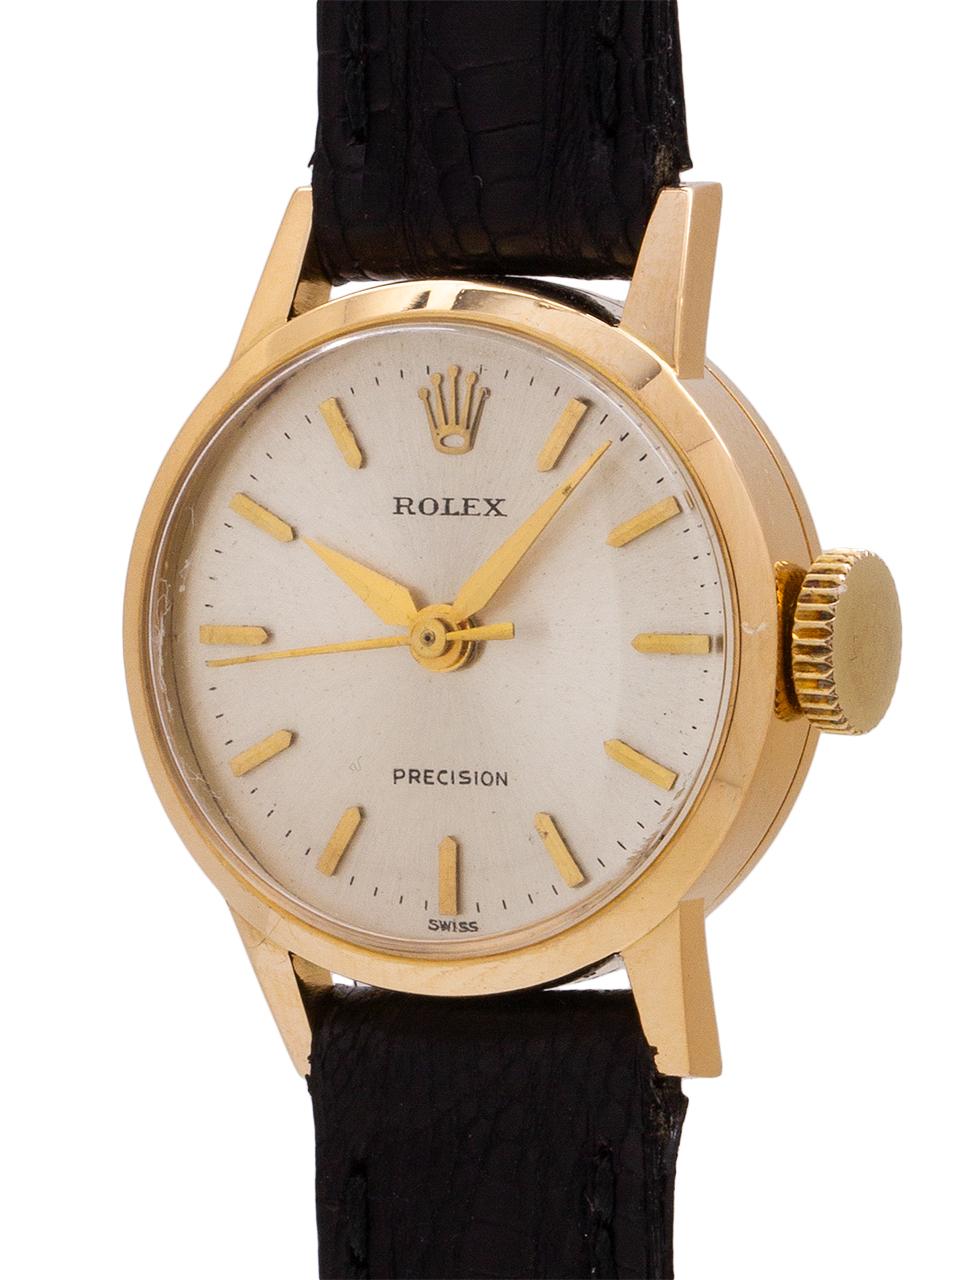 
A scarce and simple design vintage lady’s Rolex 18K YG dress model circa 1950’s. Featuring a 20mm heavy snap back case with pronounced and angled lugs and featuring a beautiful matte silvered satin dial with applied gold indexes, applied Rolex